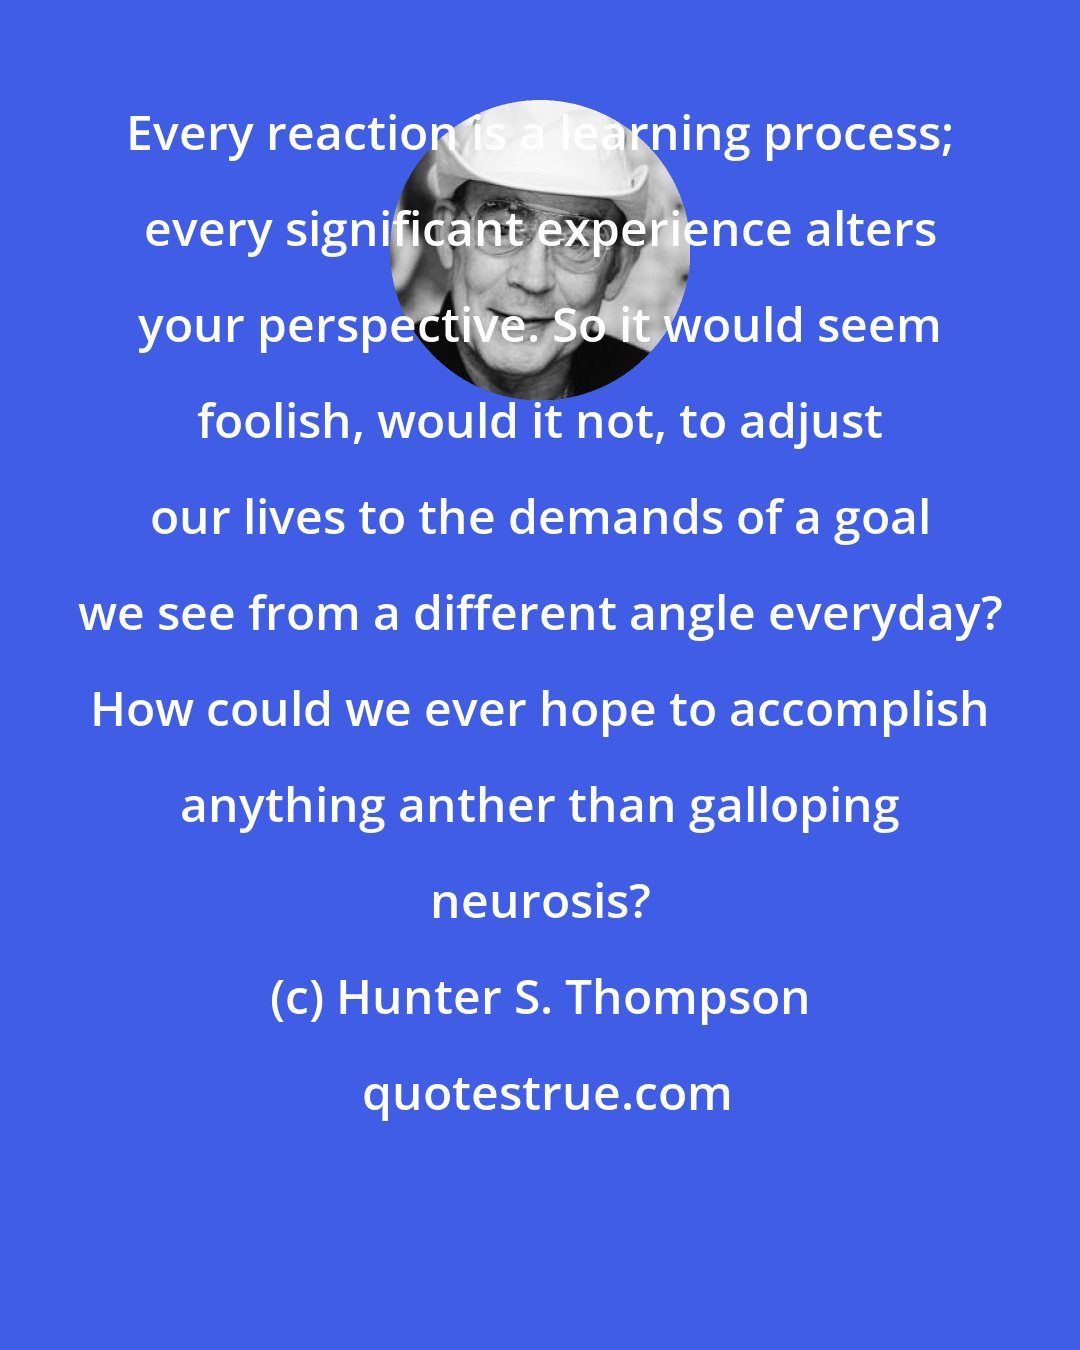 Hunter S. Thompson: Every reaction is a learning process; every significant experience alters your perspective. So it would seem foolish, would it not, to adjust our lives to the demands of a goal we see from a different angle everyday? How could we ever hope to accomplish anything anther than galloping neurosis?